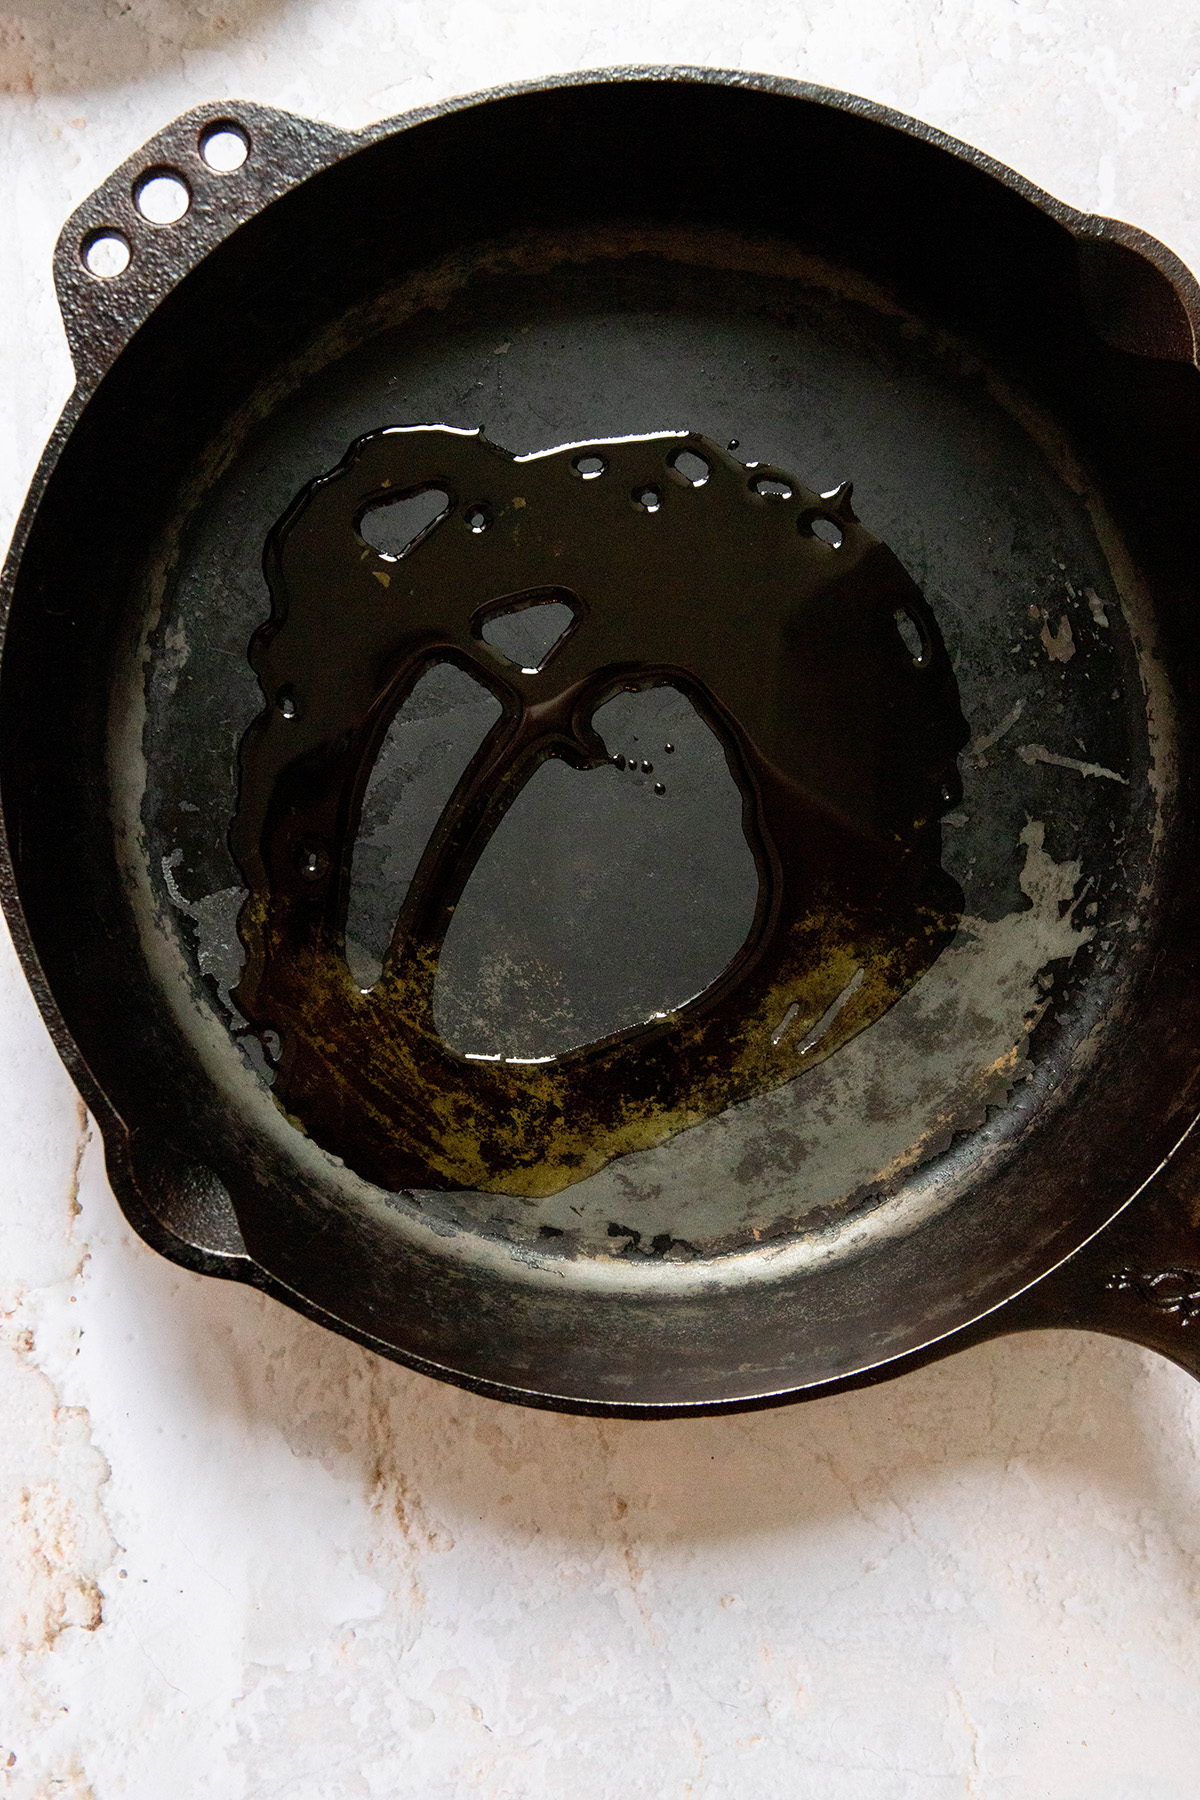 oil in a cast iron pan